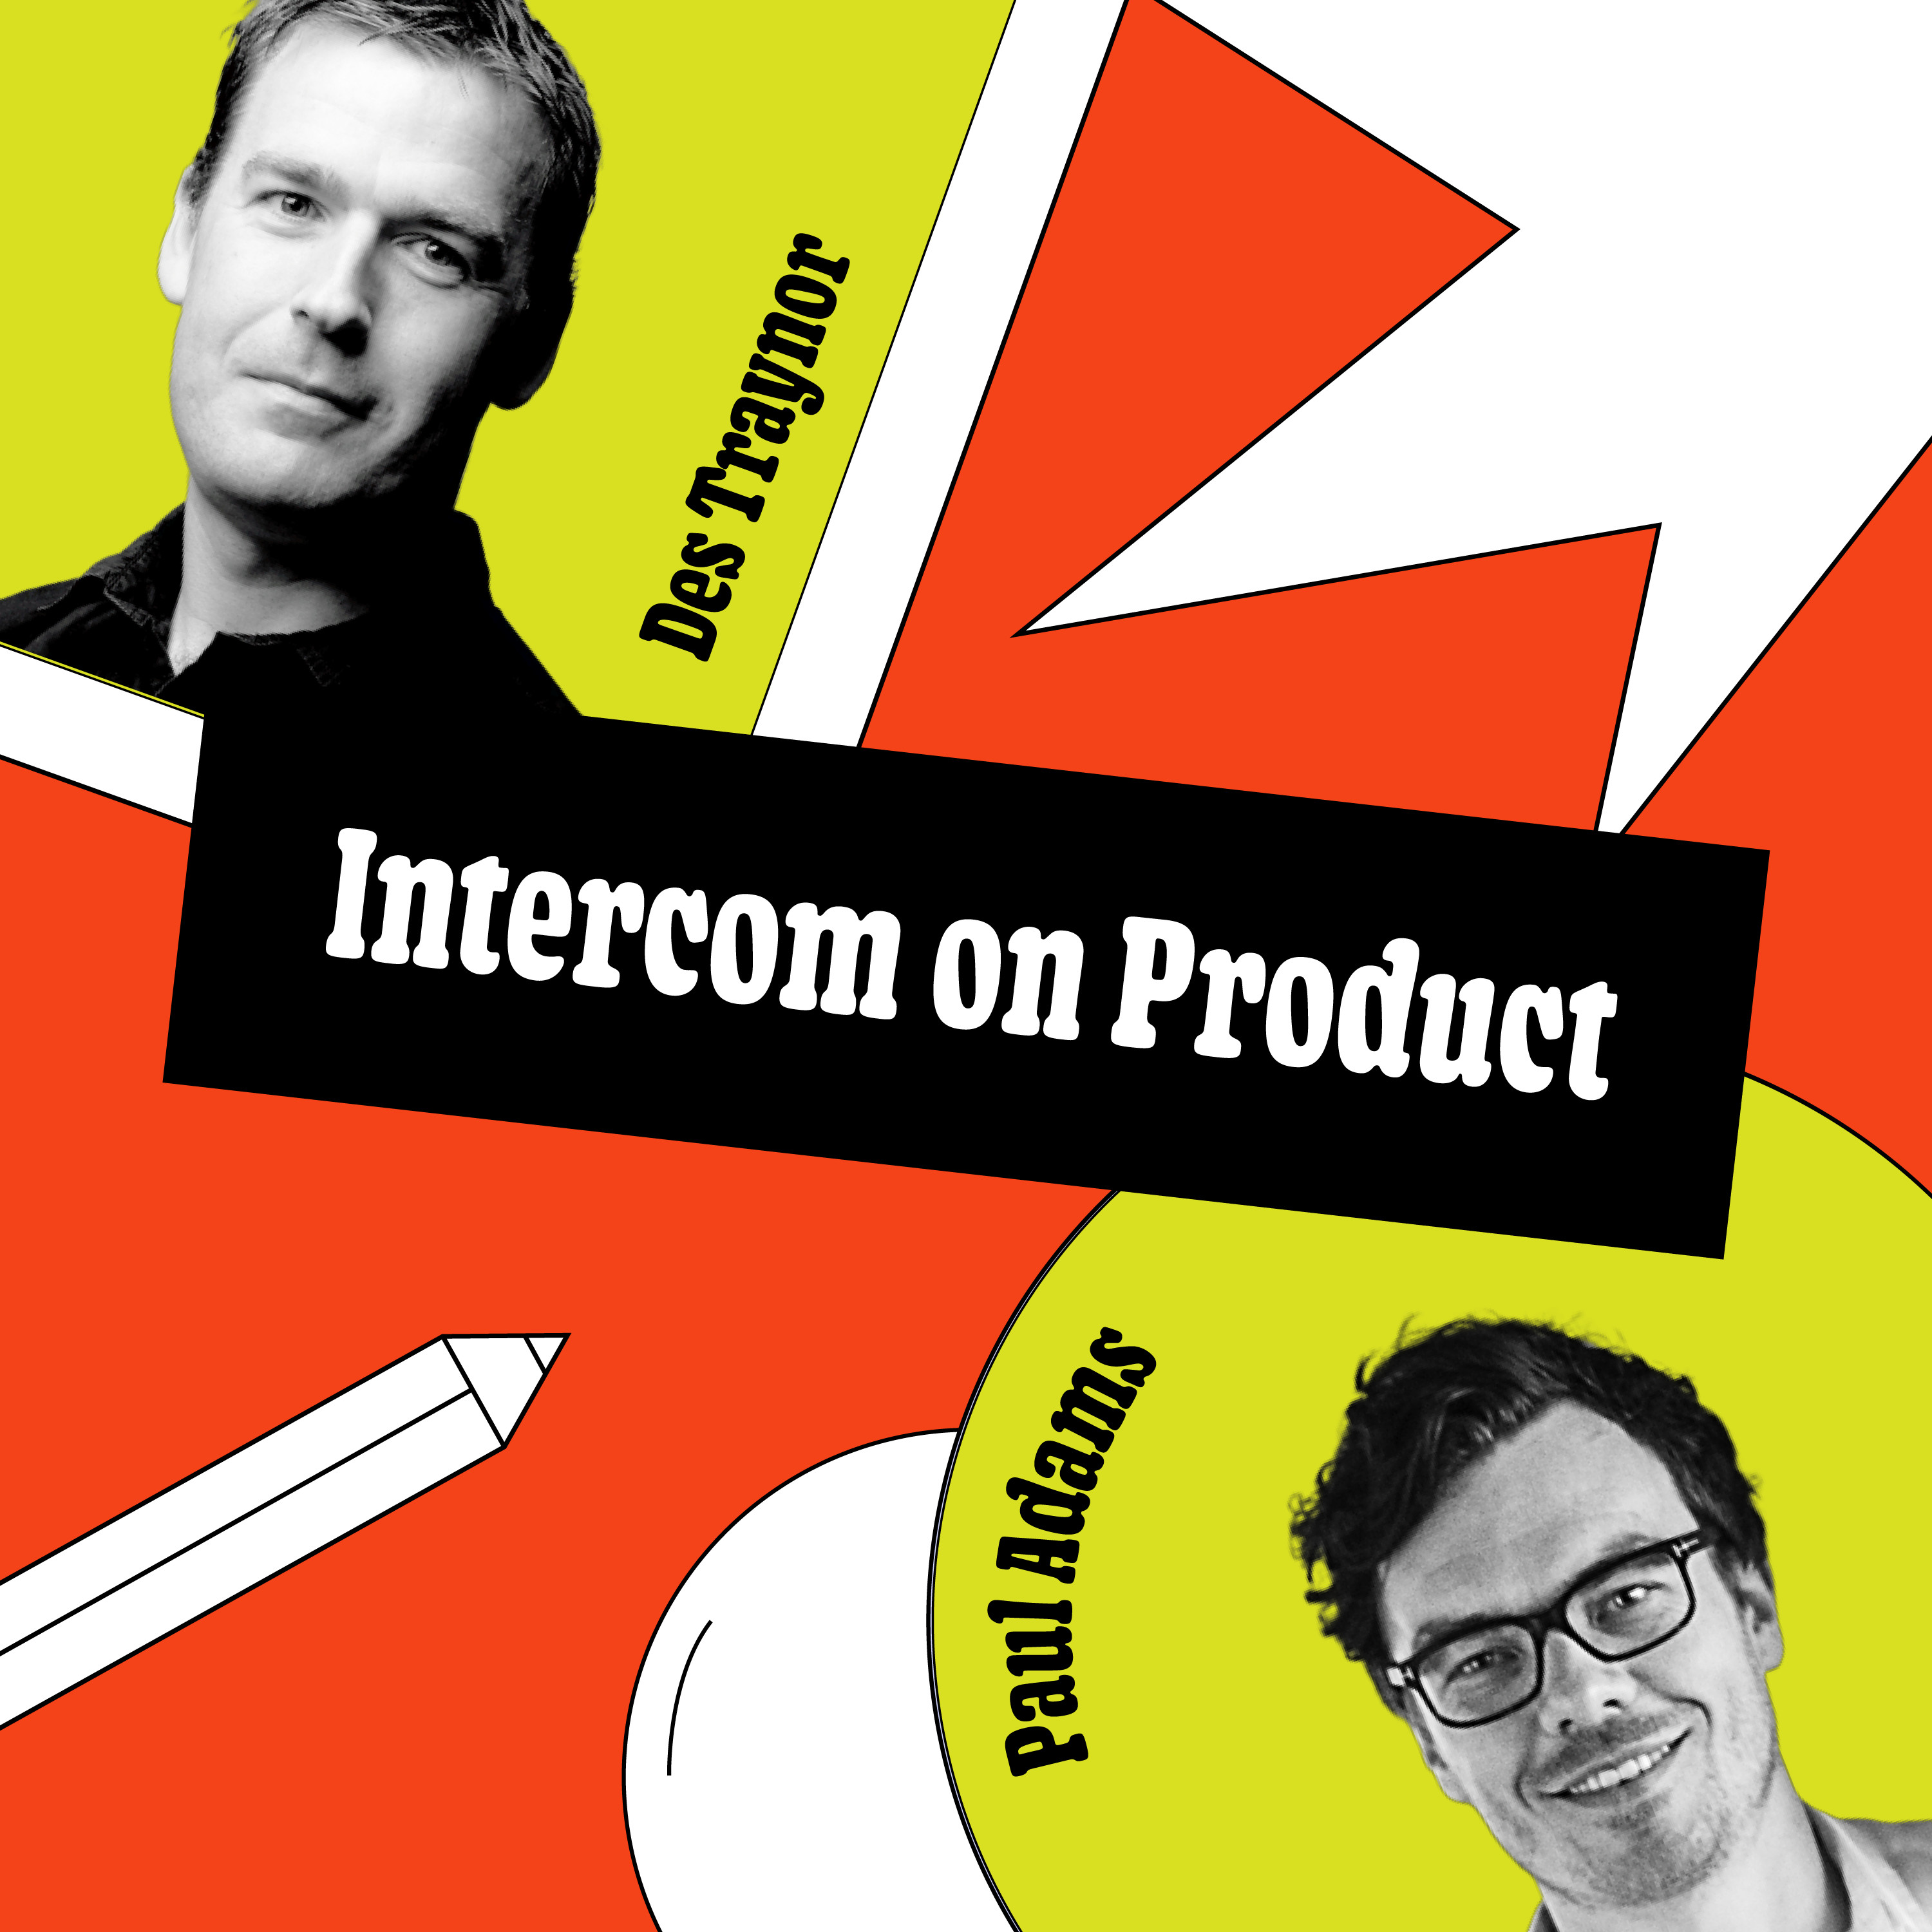 Intercom on Product: Rethinking outcomes over output